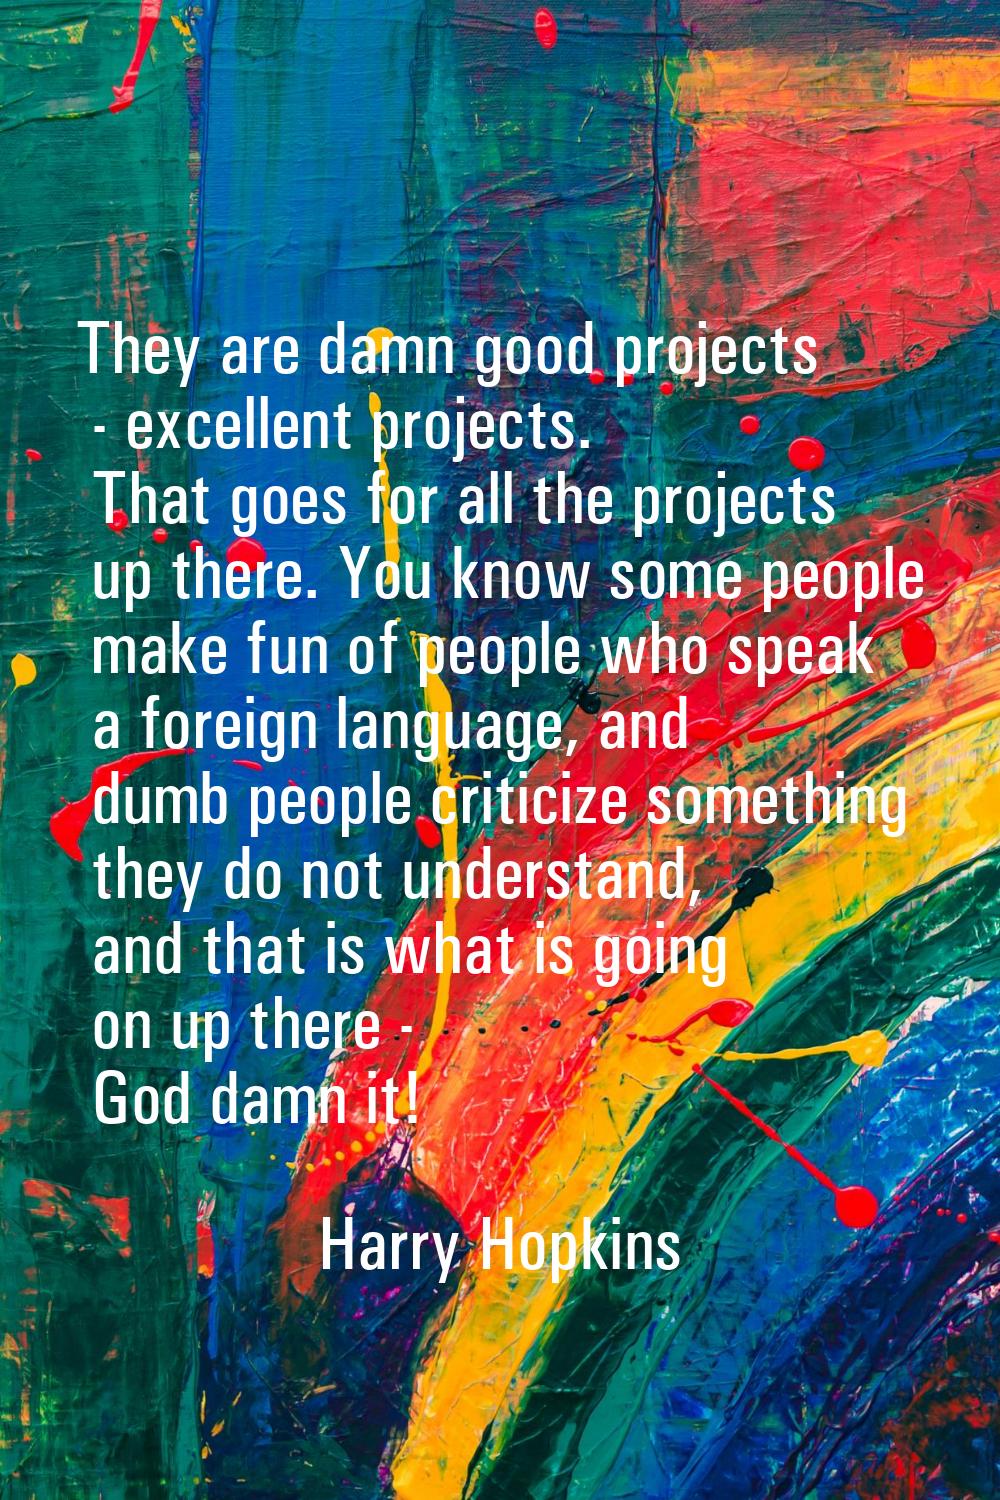 They are damn good projects - excellent projects. That goes for all the projects up there. You know